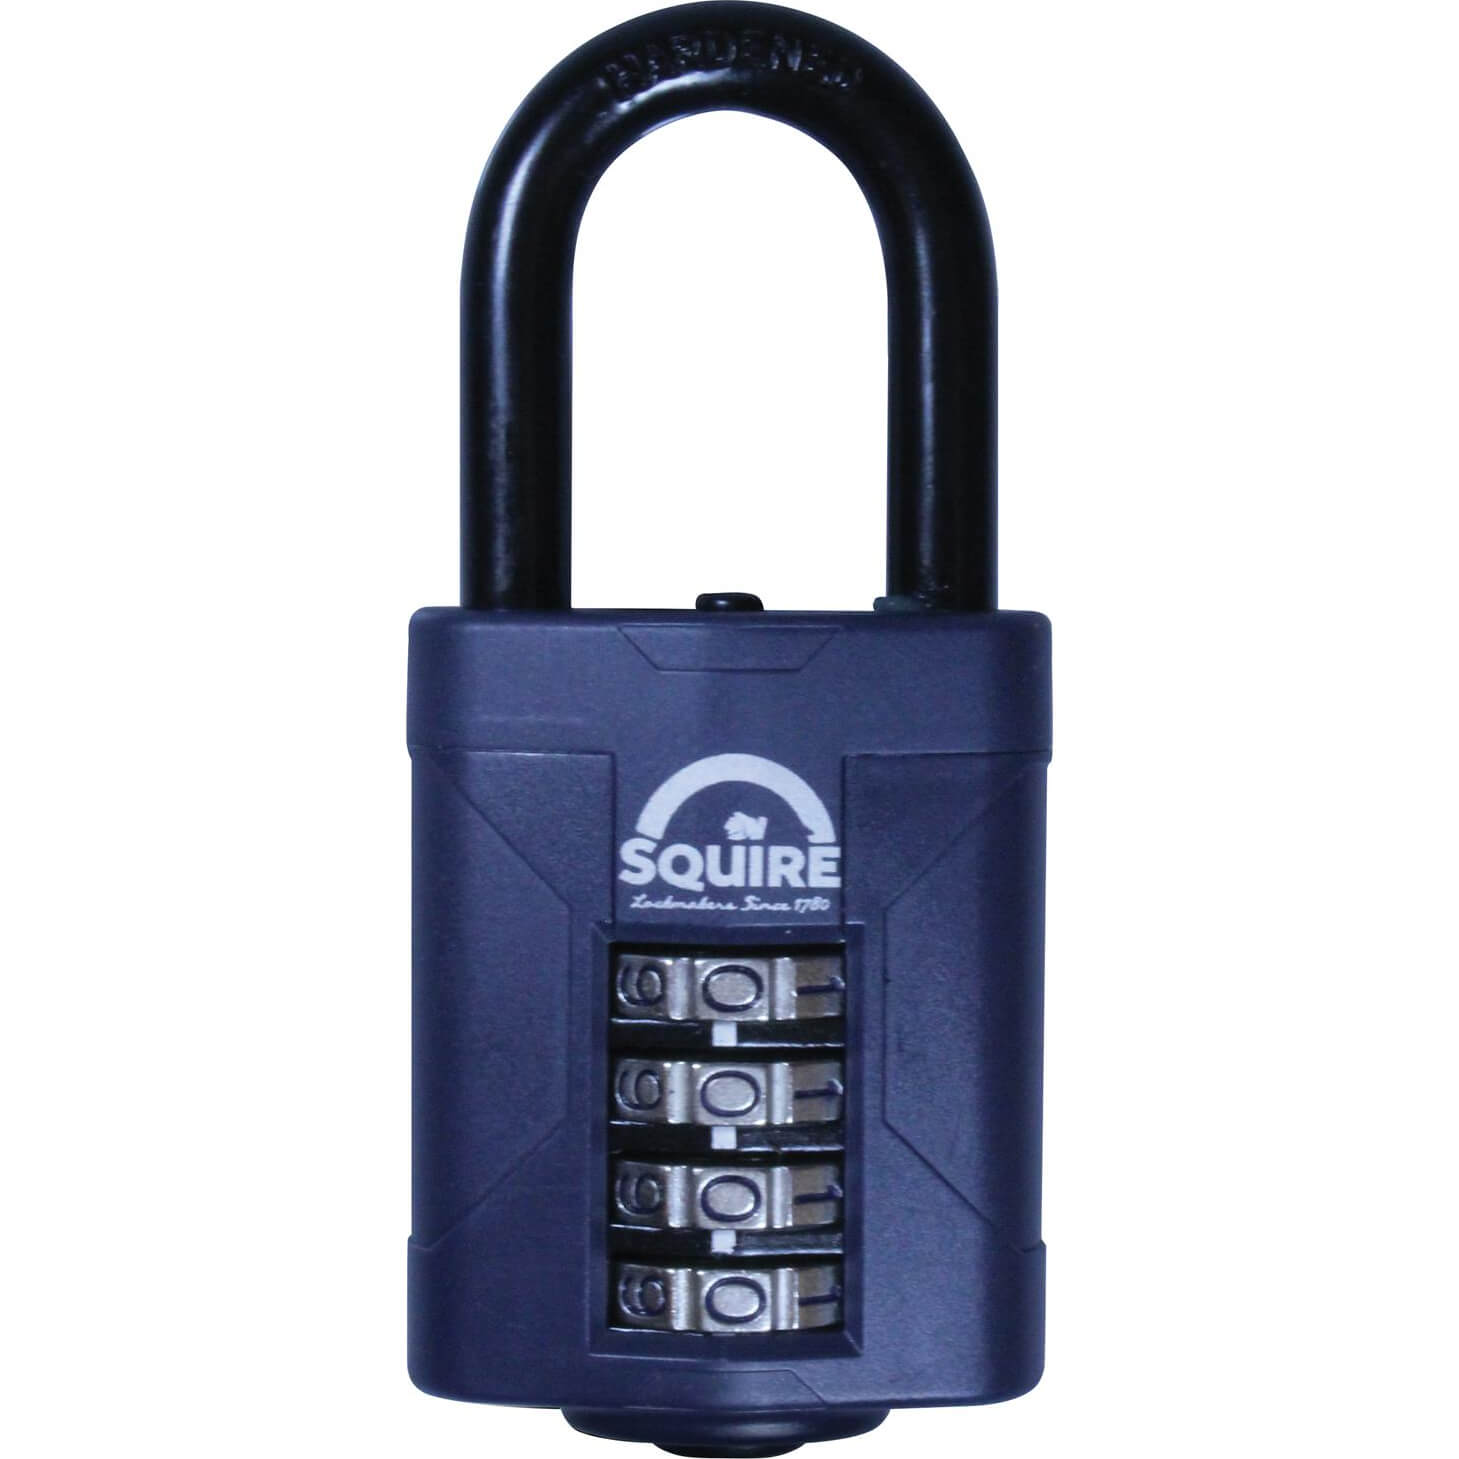 Image of Henry Squire Push Button Combination Padlock 50mm Long